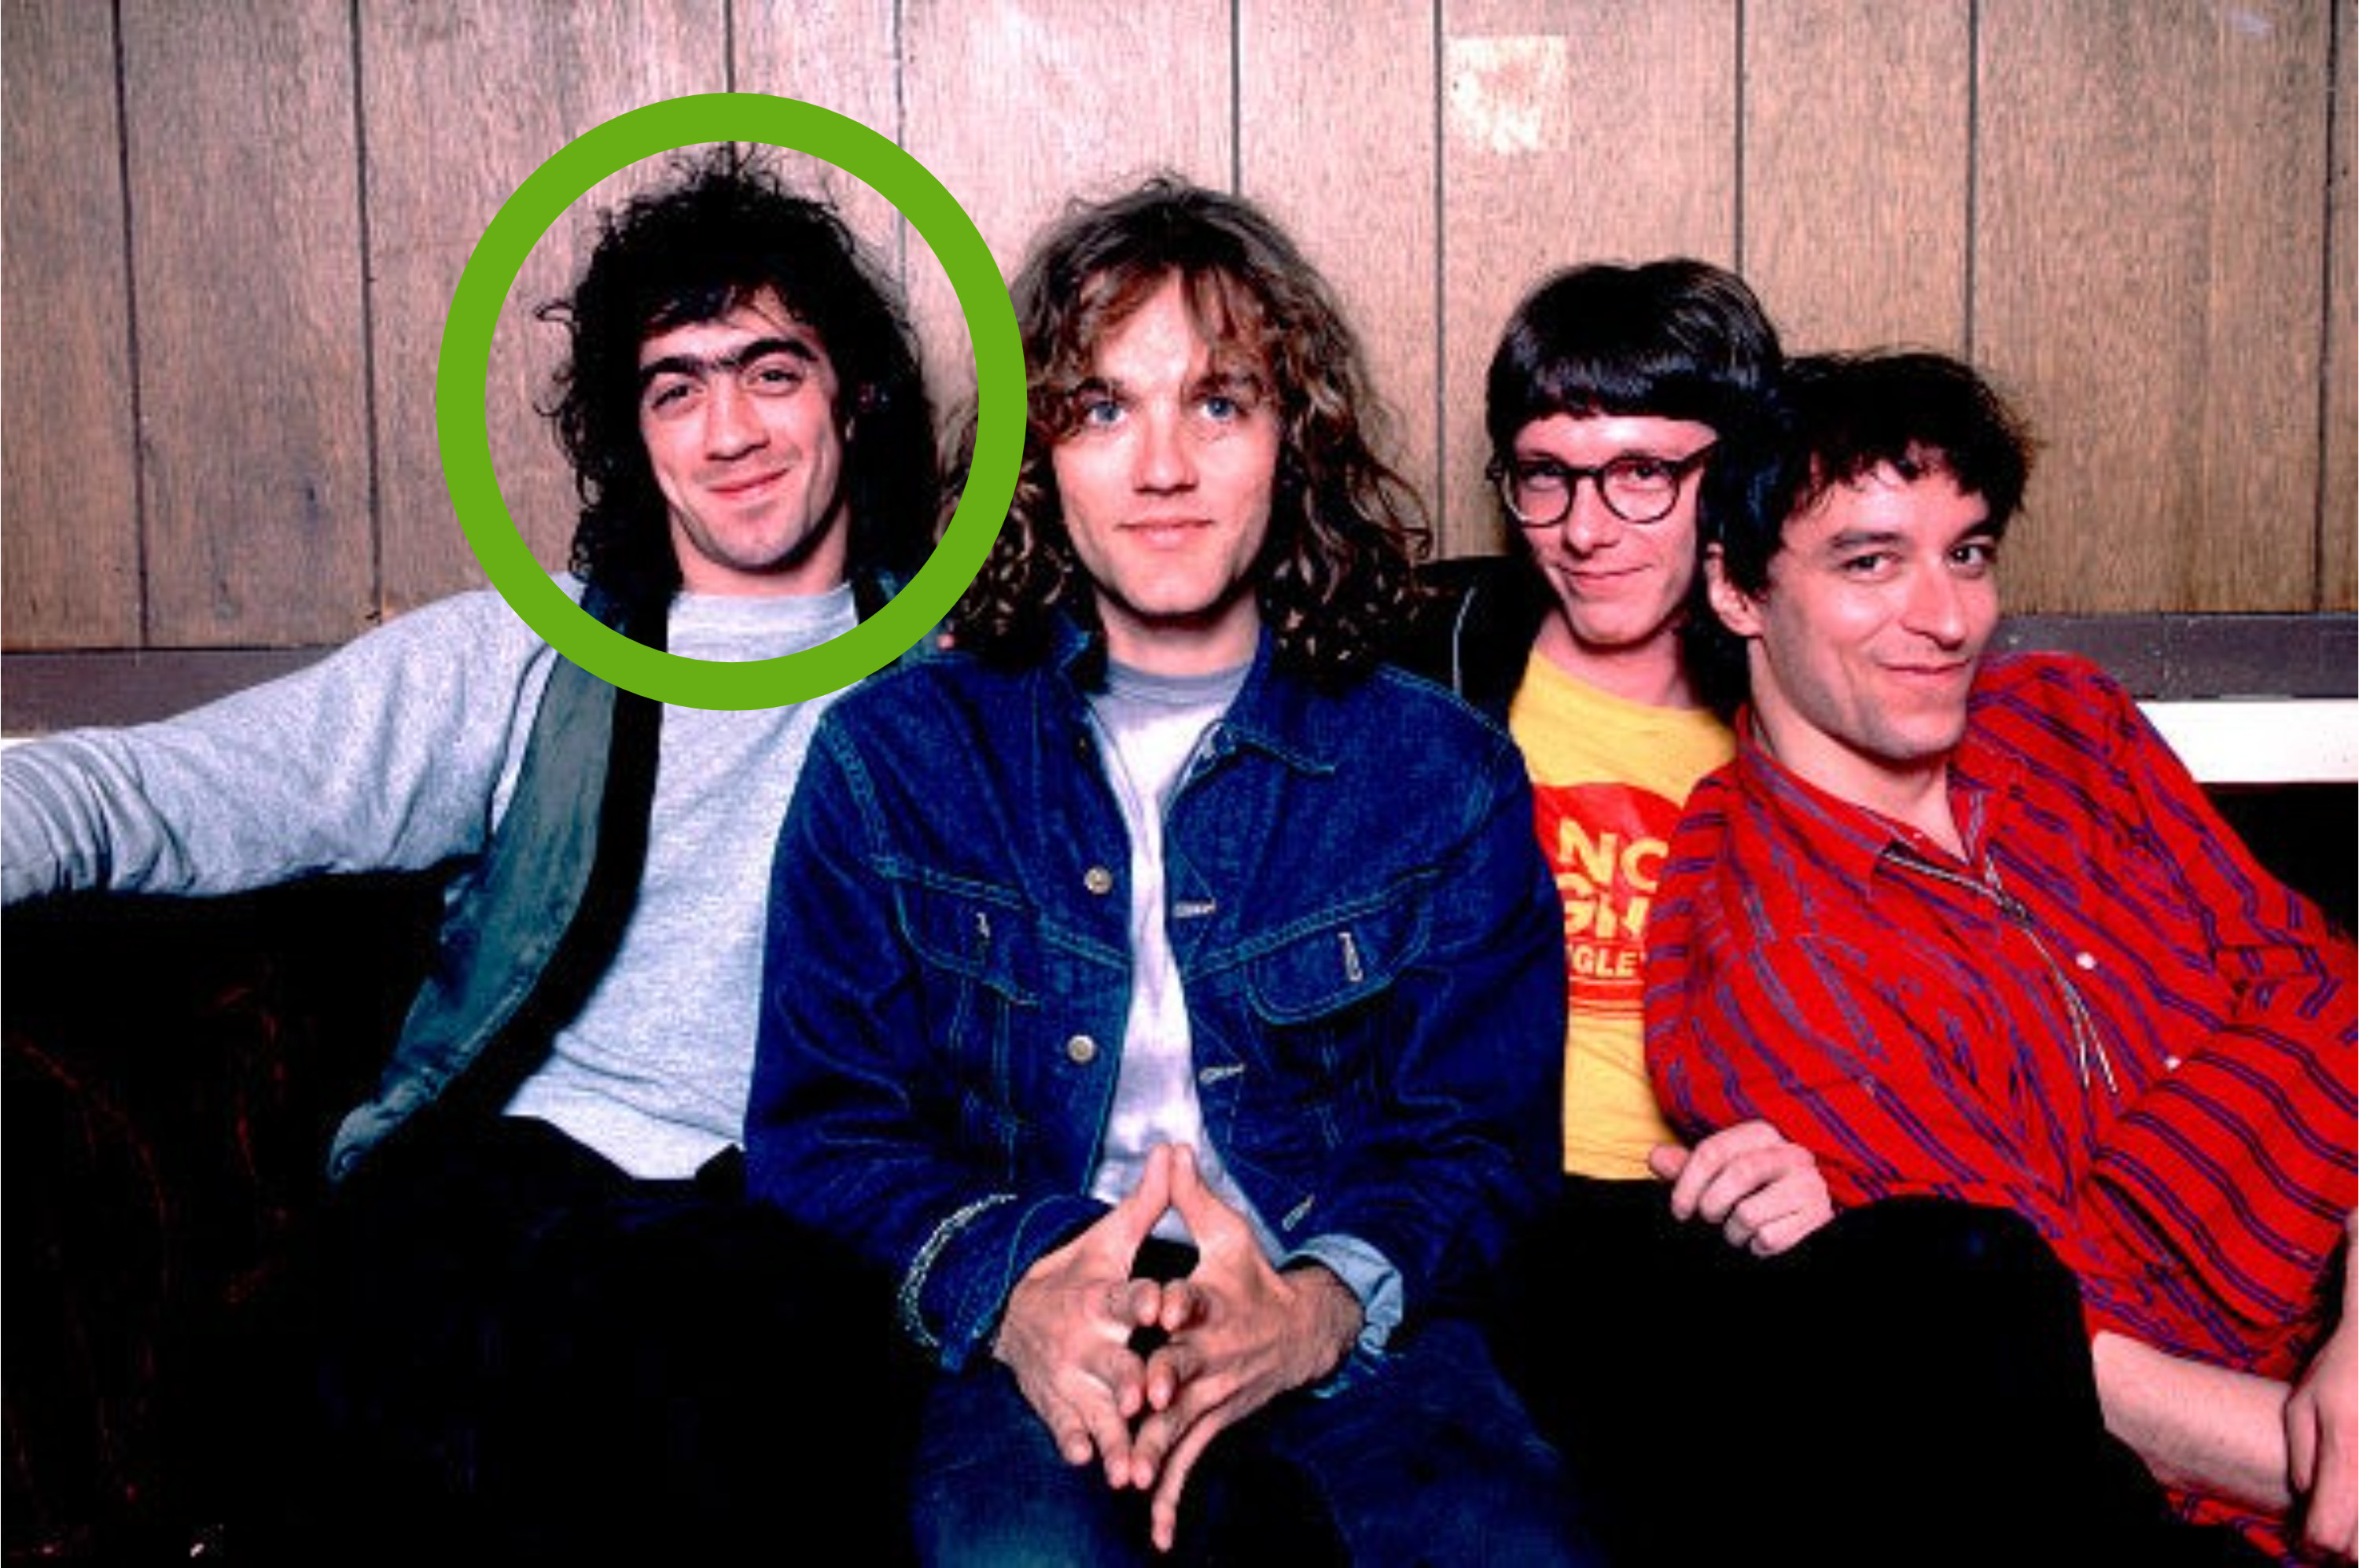 Berry with other members of R.E.M. in an early picture of the band